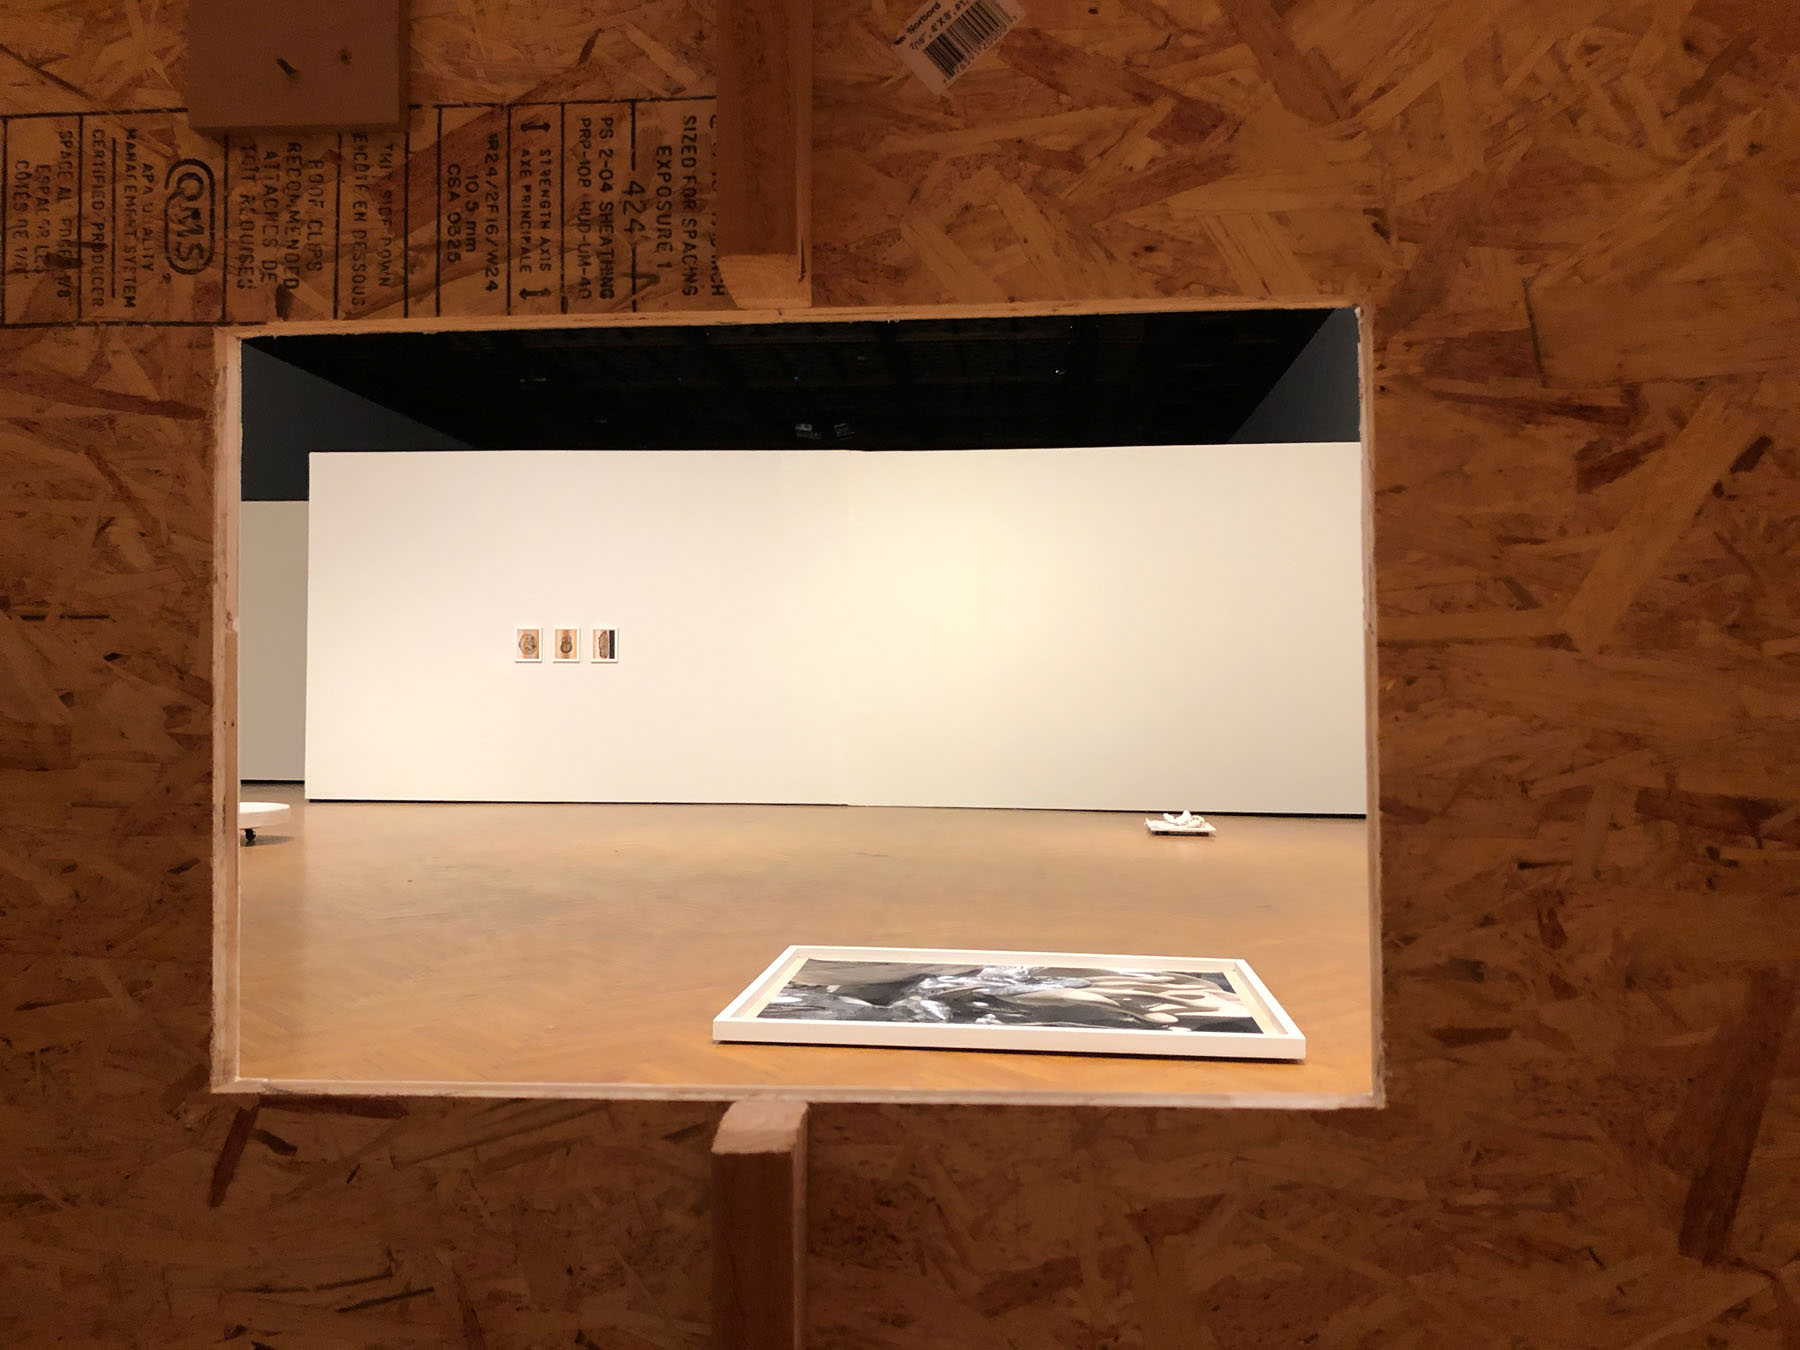   Into The Matter , installation view through altered moveable museum wall, 2018 